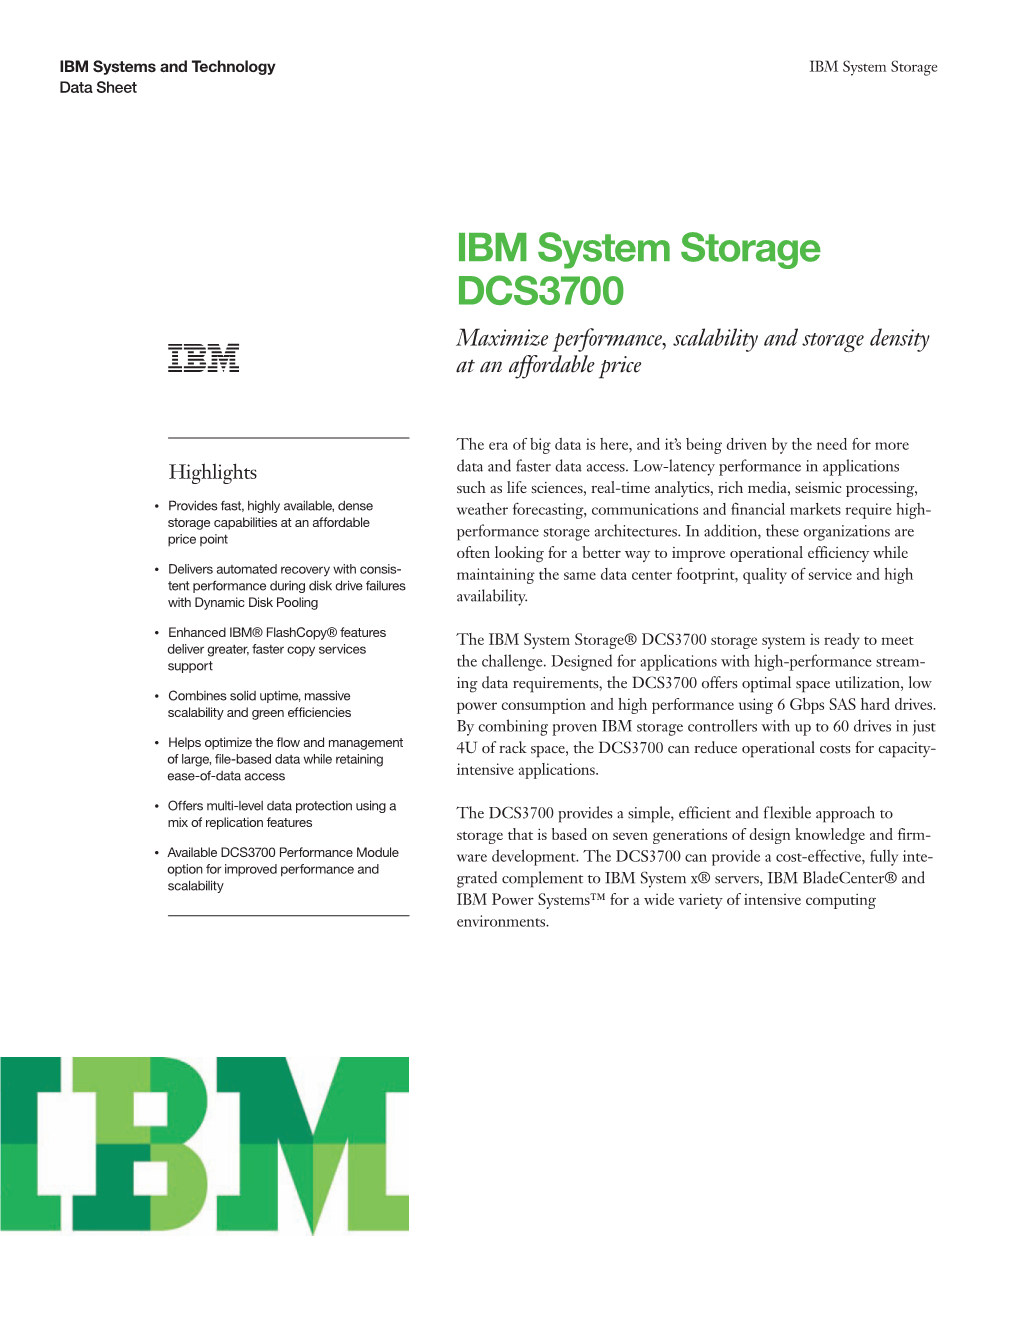 IBM System Storage DCS3700 Maximize Performance, Scalability and Storage Density at an Affordable Price